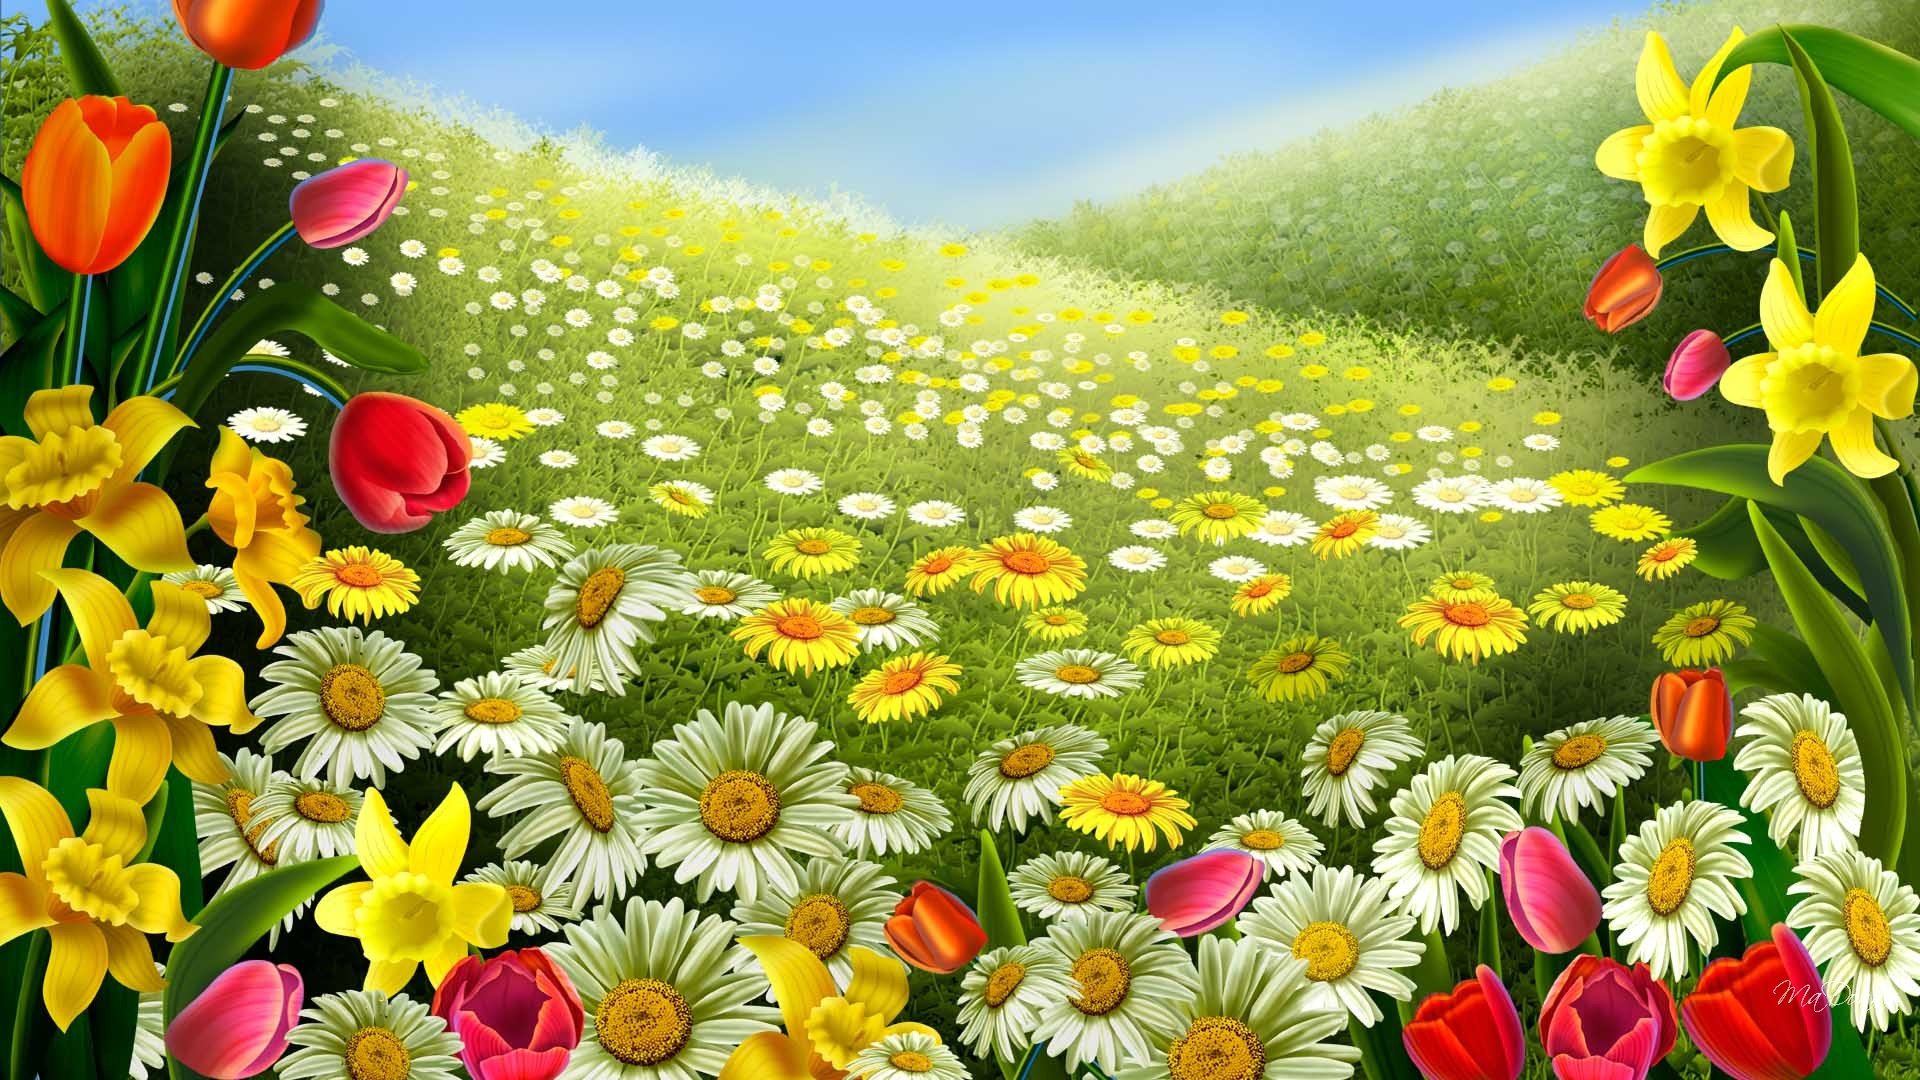 Spring wallpapers free download for desktop new